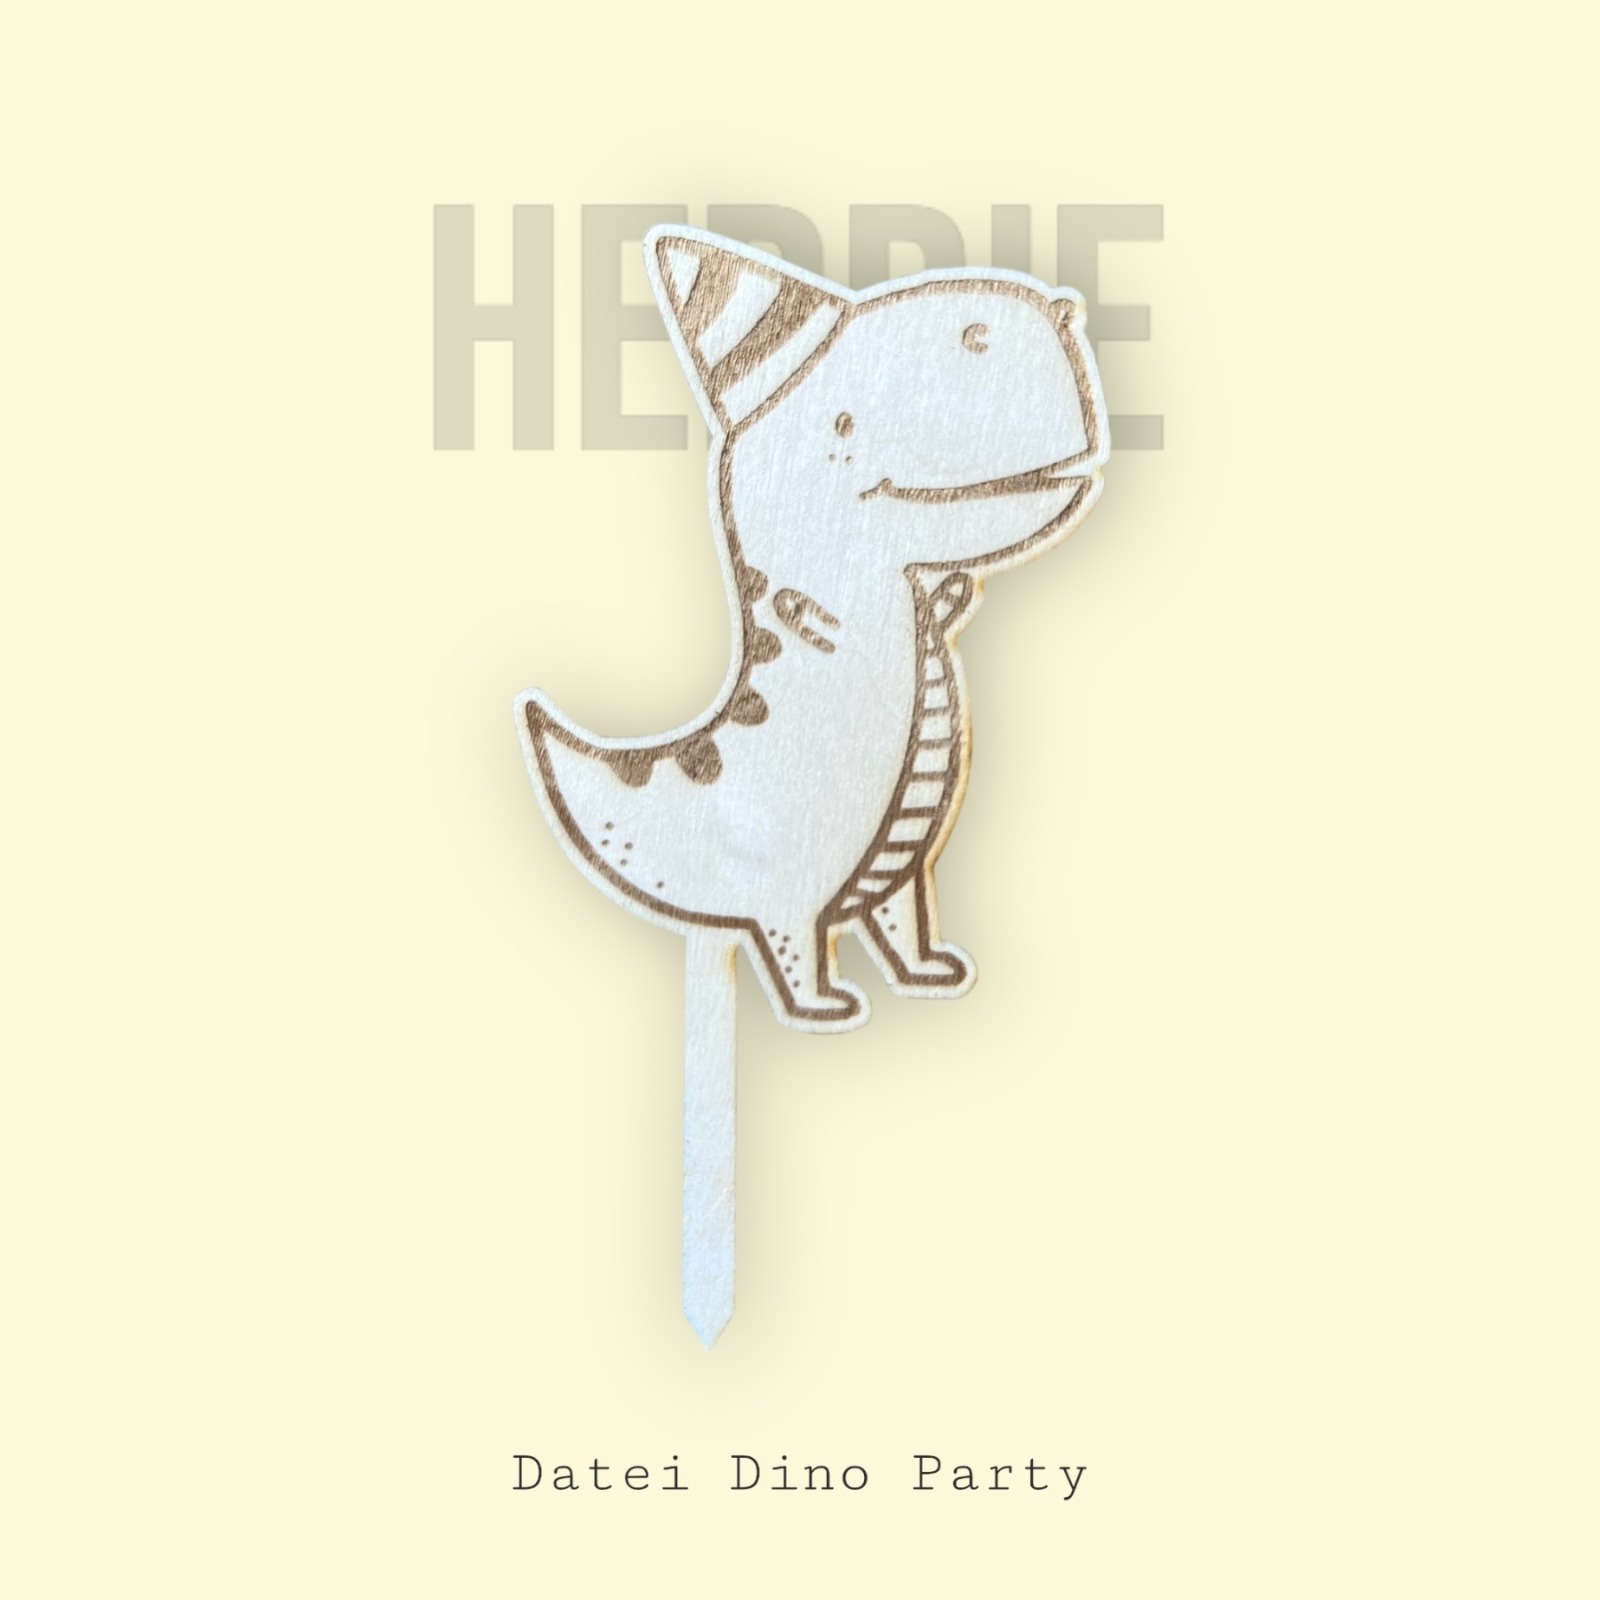 Datei Dino Party 3